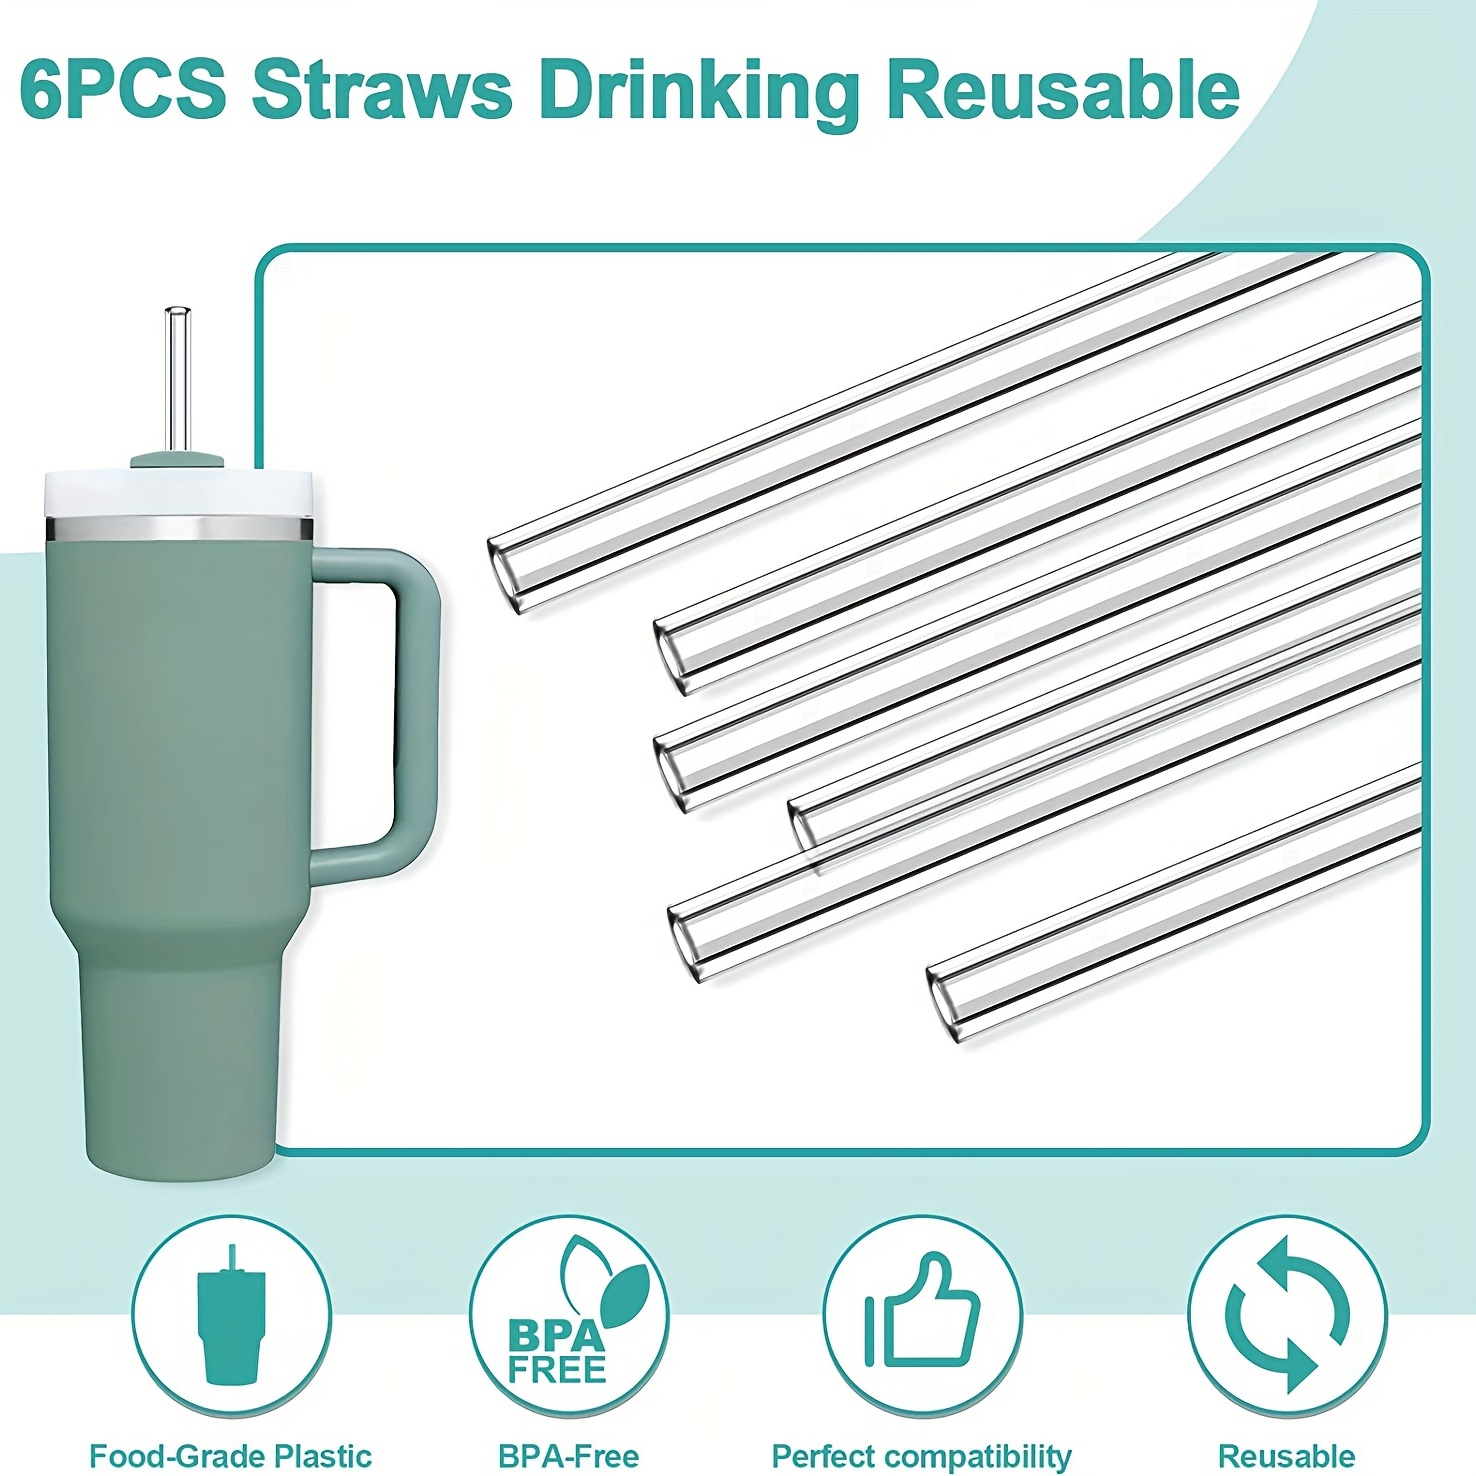 Replacement Straws for Stanley 40 oz 30 oz Tumbler,10 Pack Reusable Clear  Long Plastic Straws & 2 Pack Cleaning Brushes for Stanley Adventure Travel